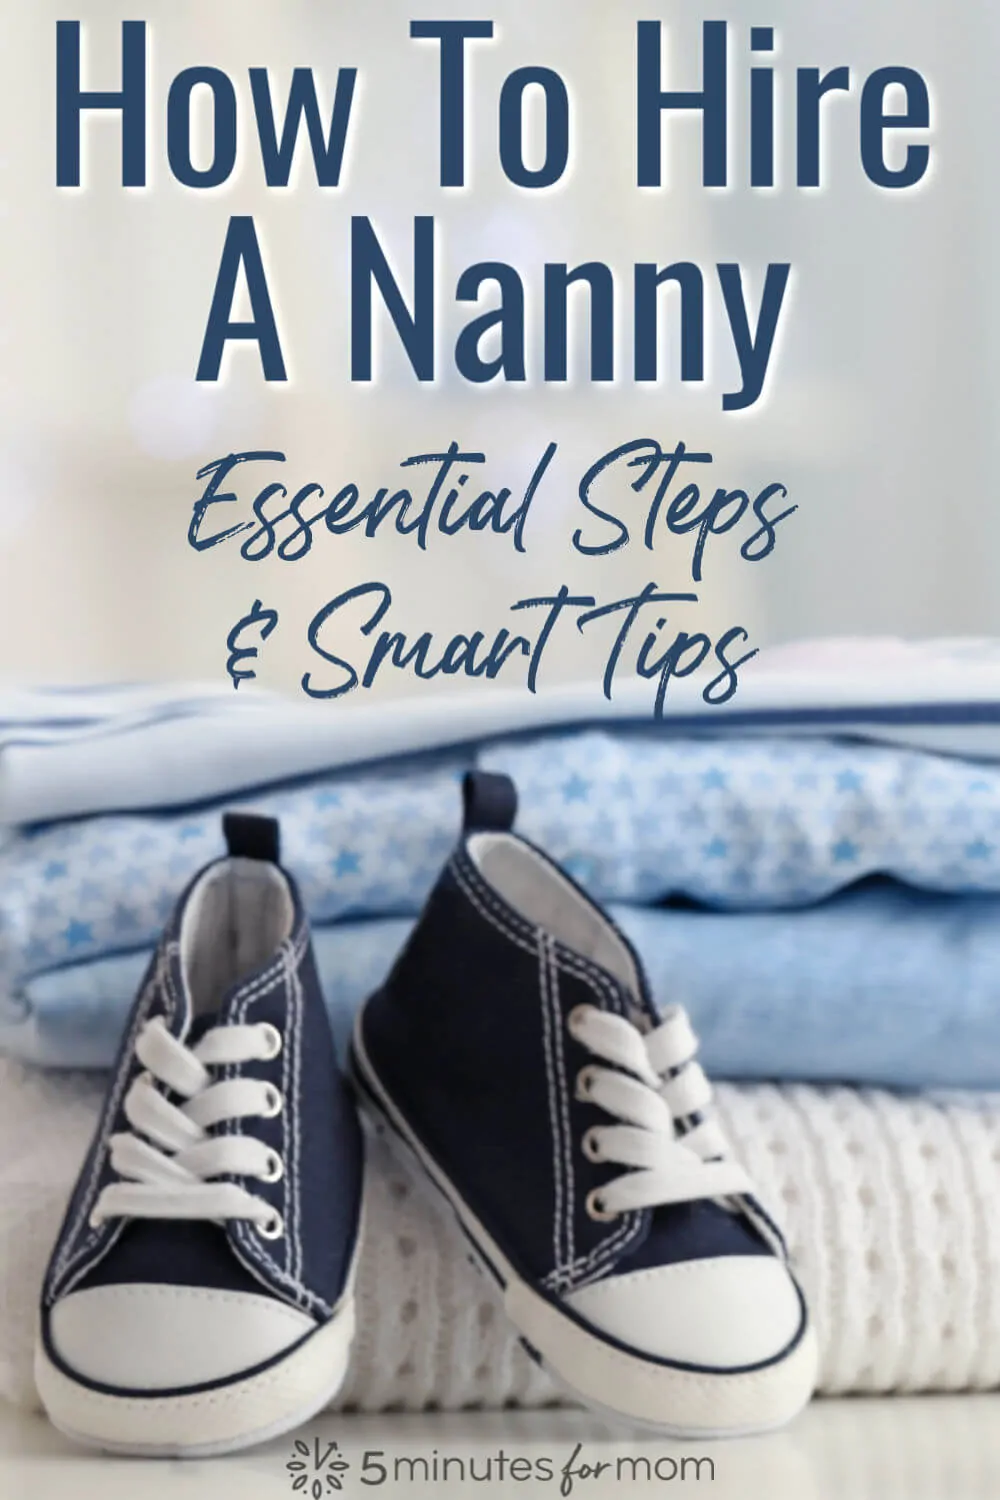 How To Hire A Nanny - Smart Tips